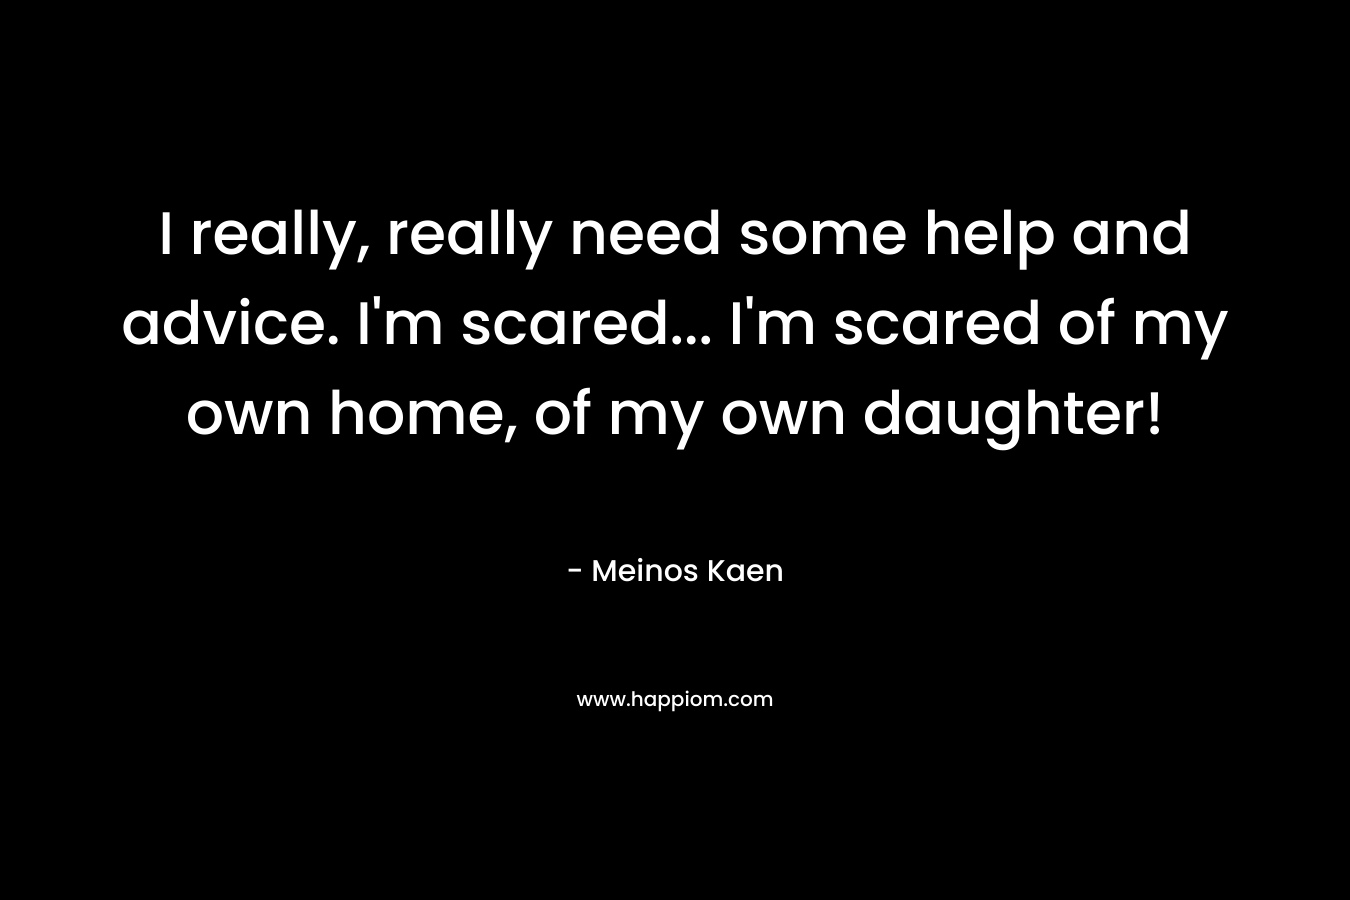 I really, really need some help and advice. I'm scared... I'm scared of my own home, of my own daughter!